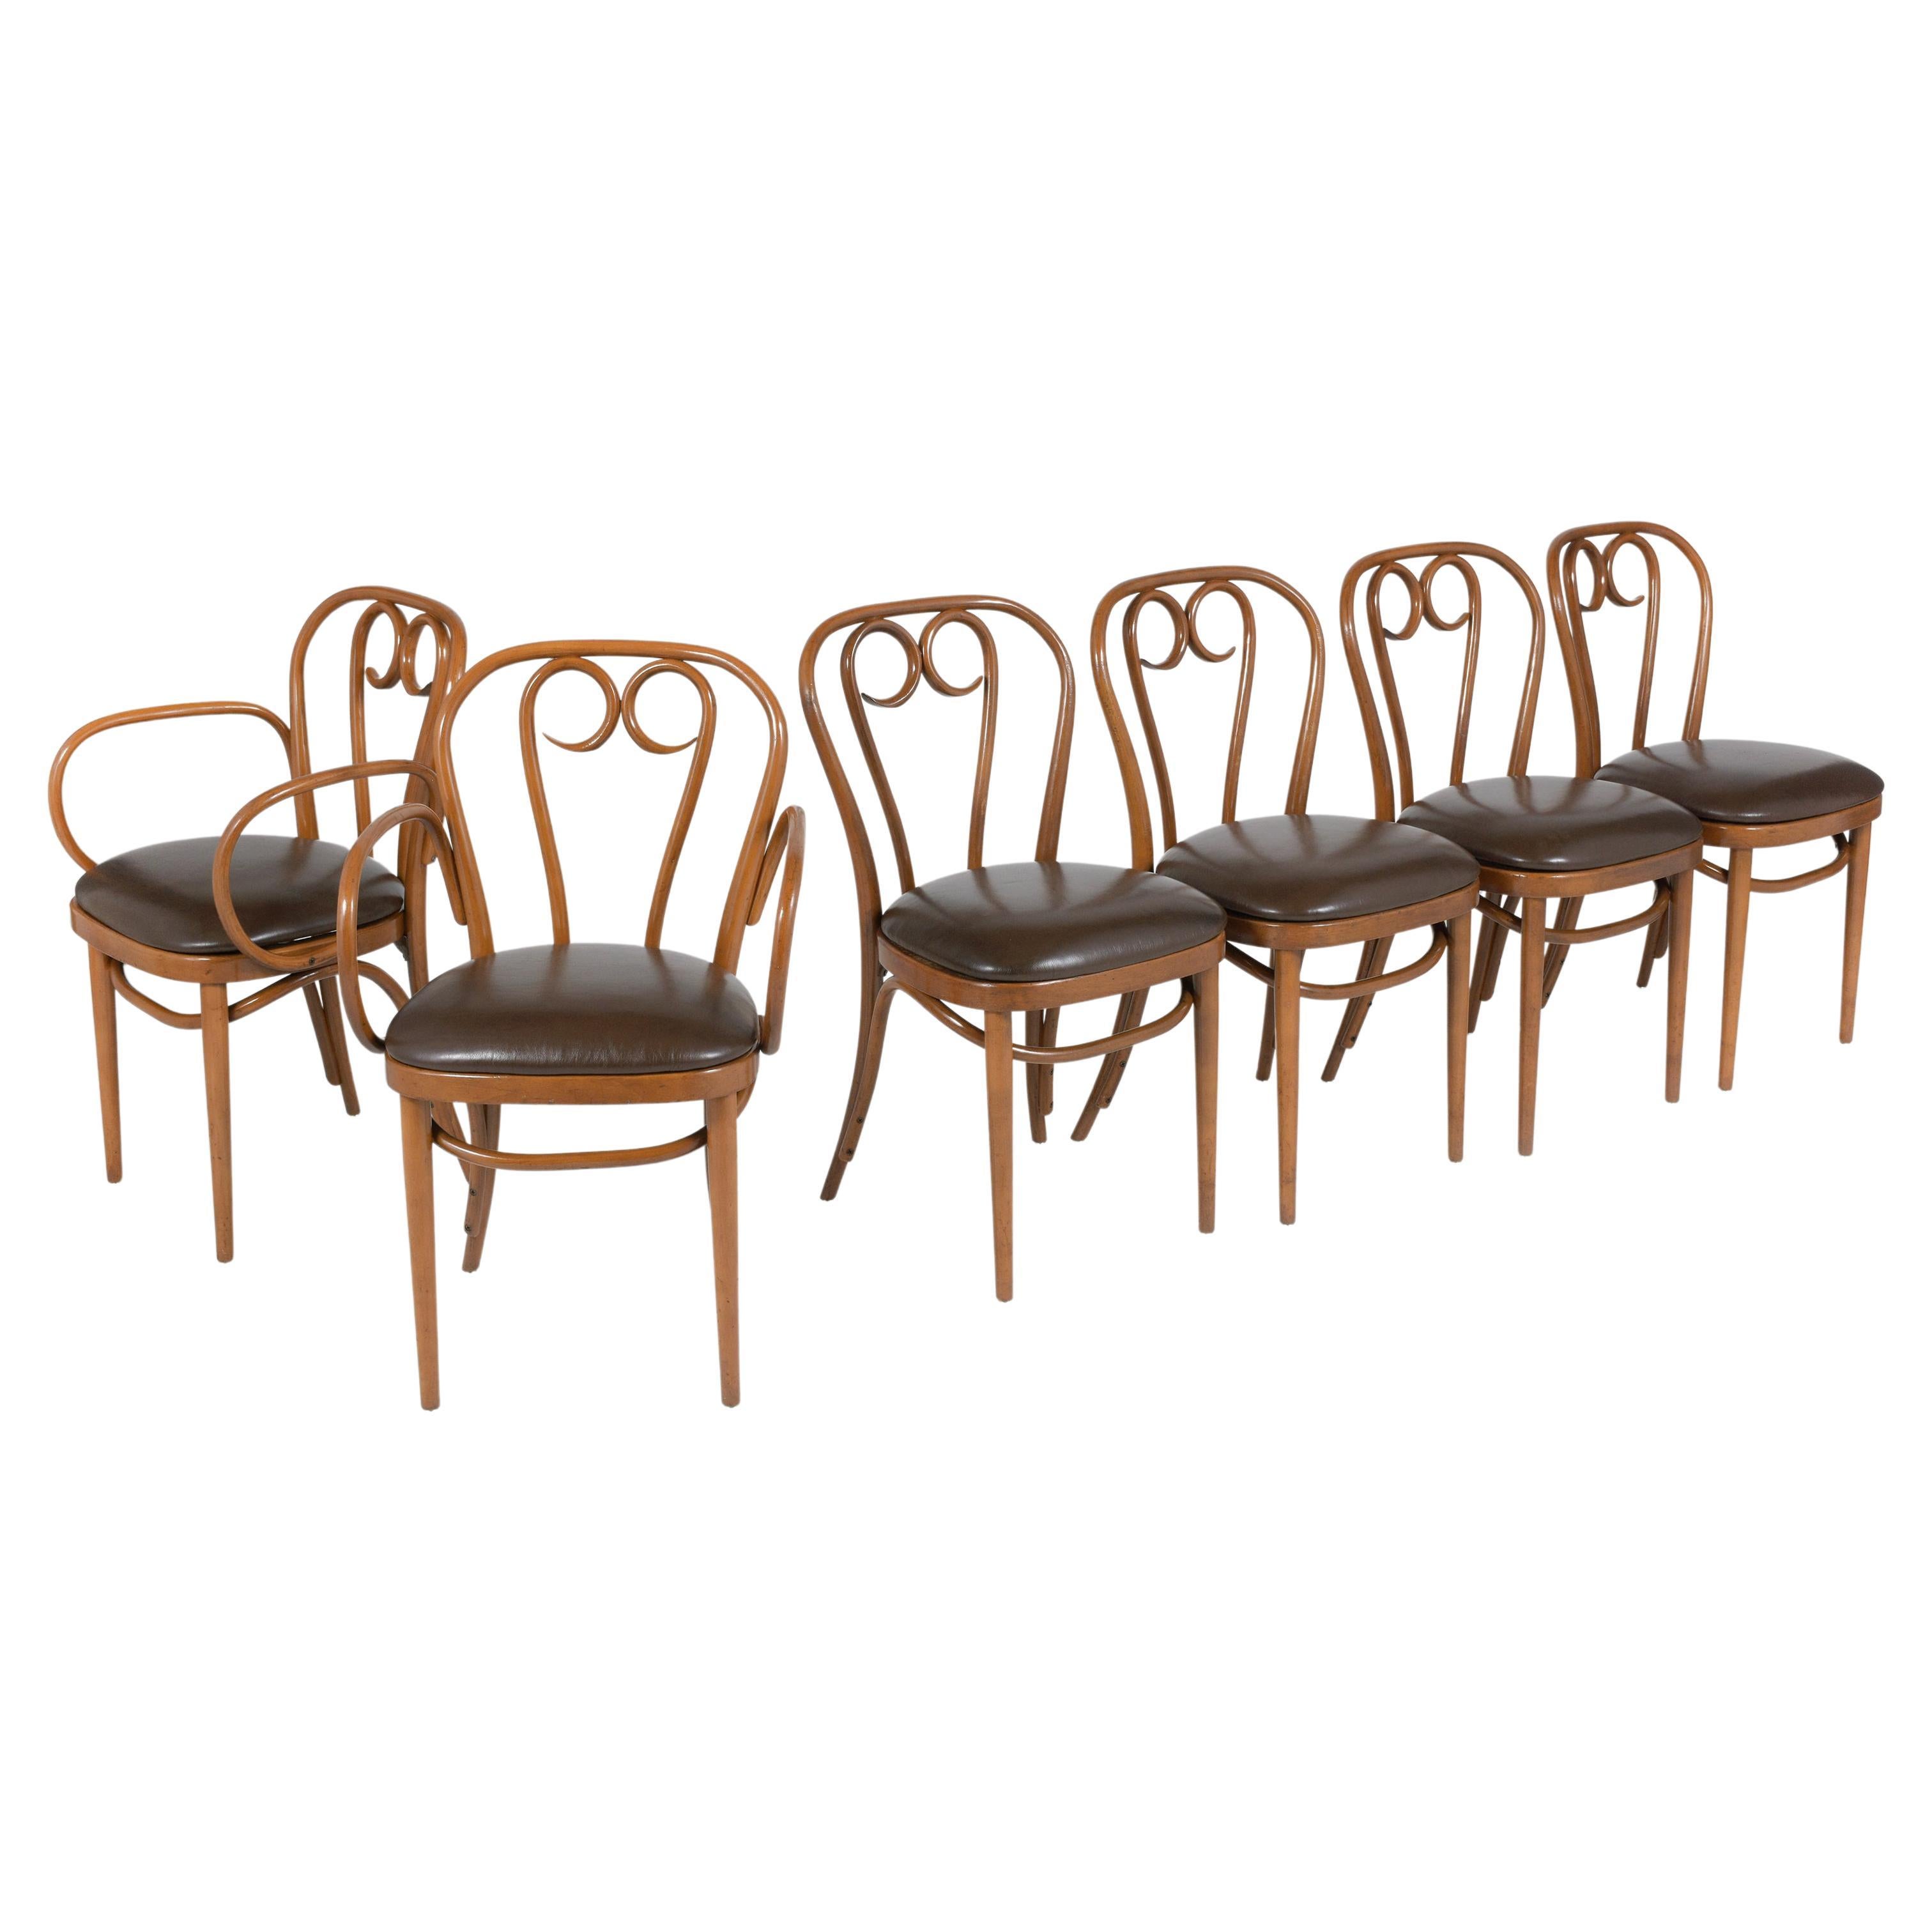 Elevate your dining experience with this exquisite set of six Thonet bentwood dining chairs, featuring two armchairs and four side chairs that have been lovingly restored to their former glory. These iconic chairs are a testament to Thonet's